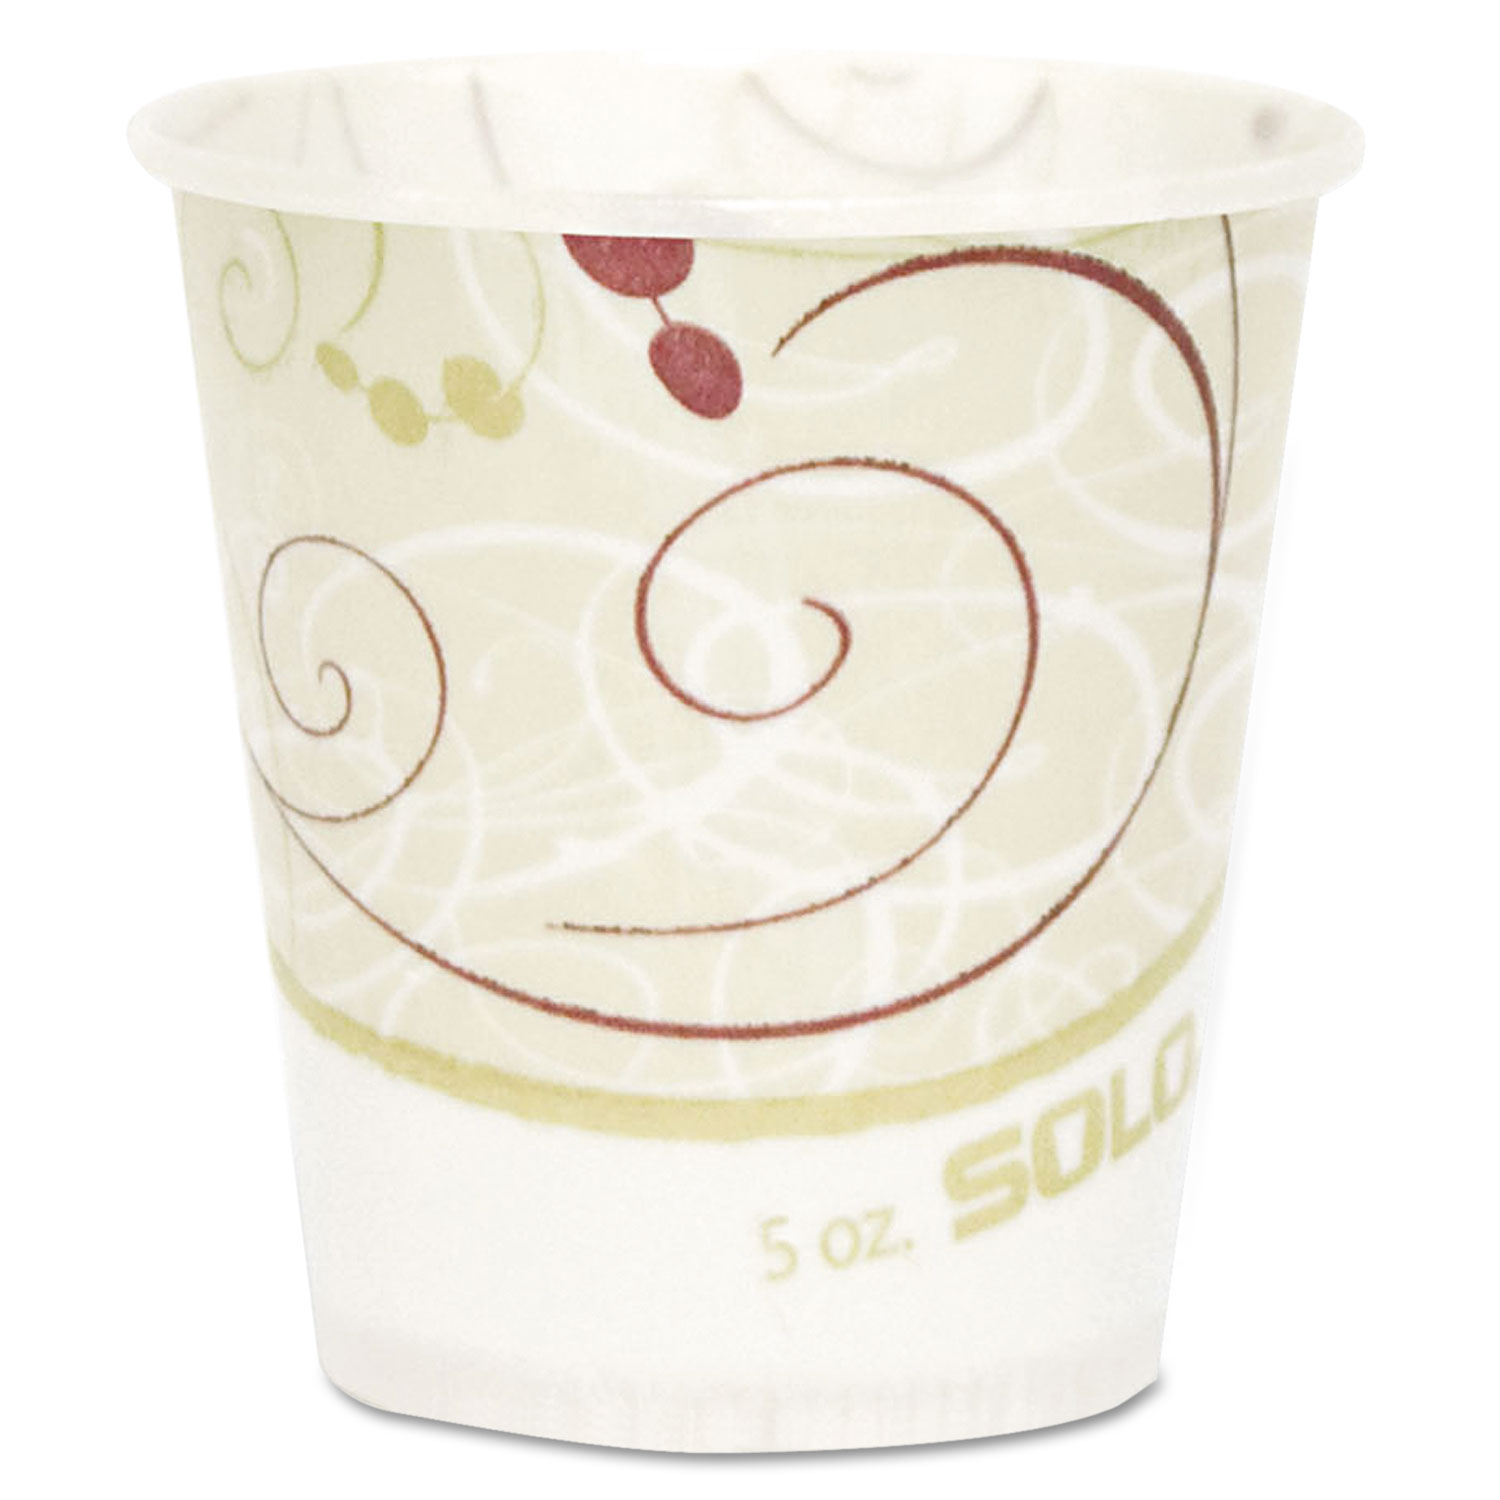  Dart R53-J8000 Paper Water Cups, Waxed, 5oz, 100/Bag, 30 Bags/Carton (SCCR53SYMCT) 